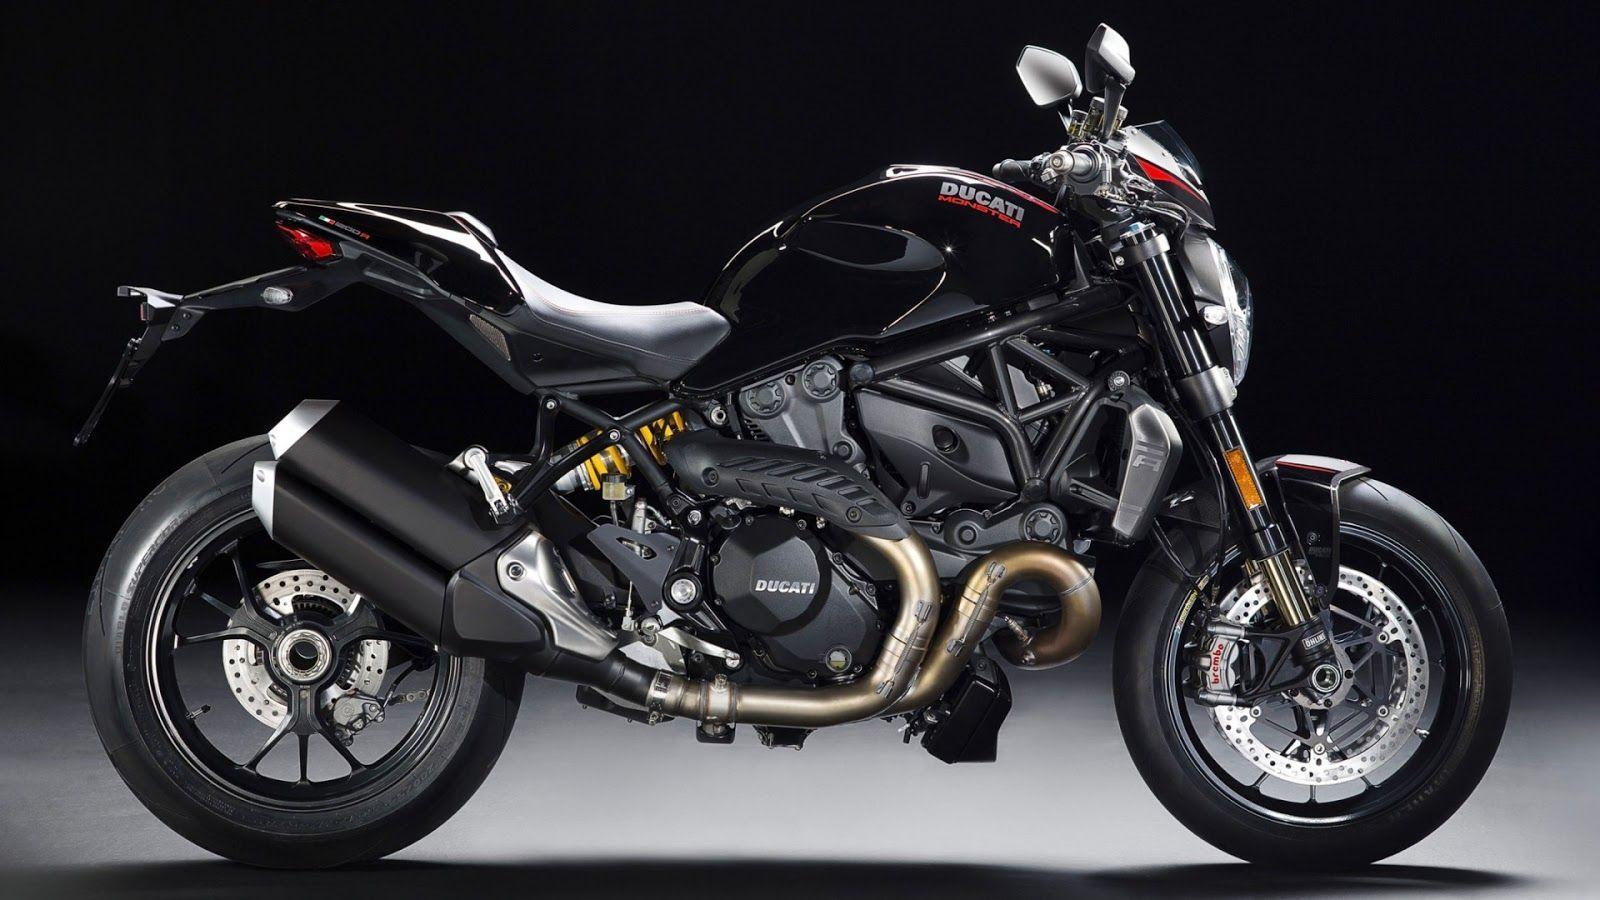 Ducati Monster 1200 R 2016 HD Image Latest New & Old Car HD